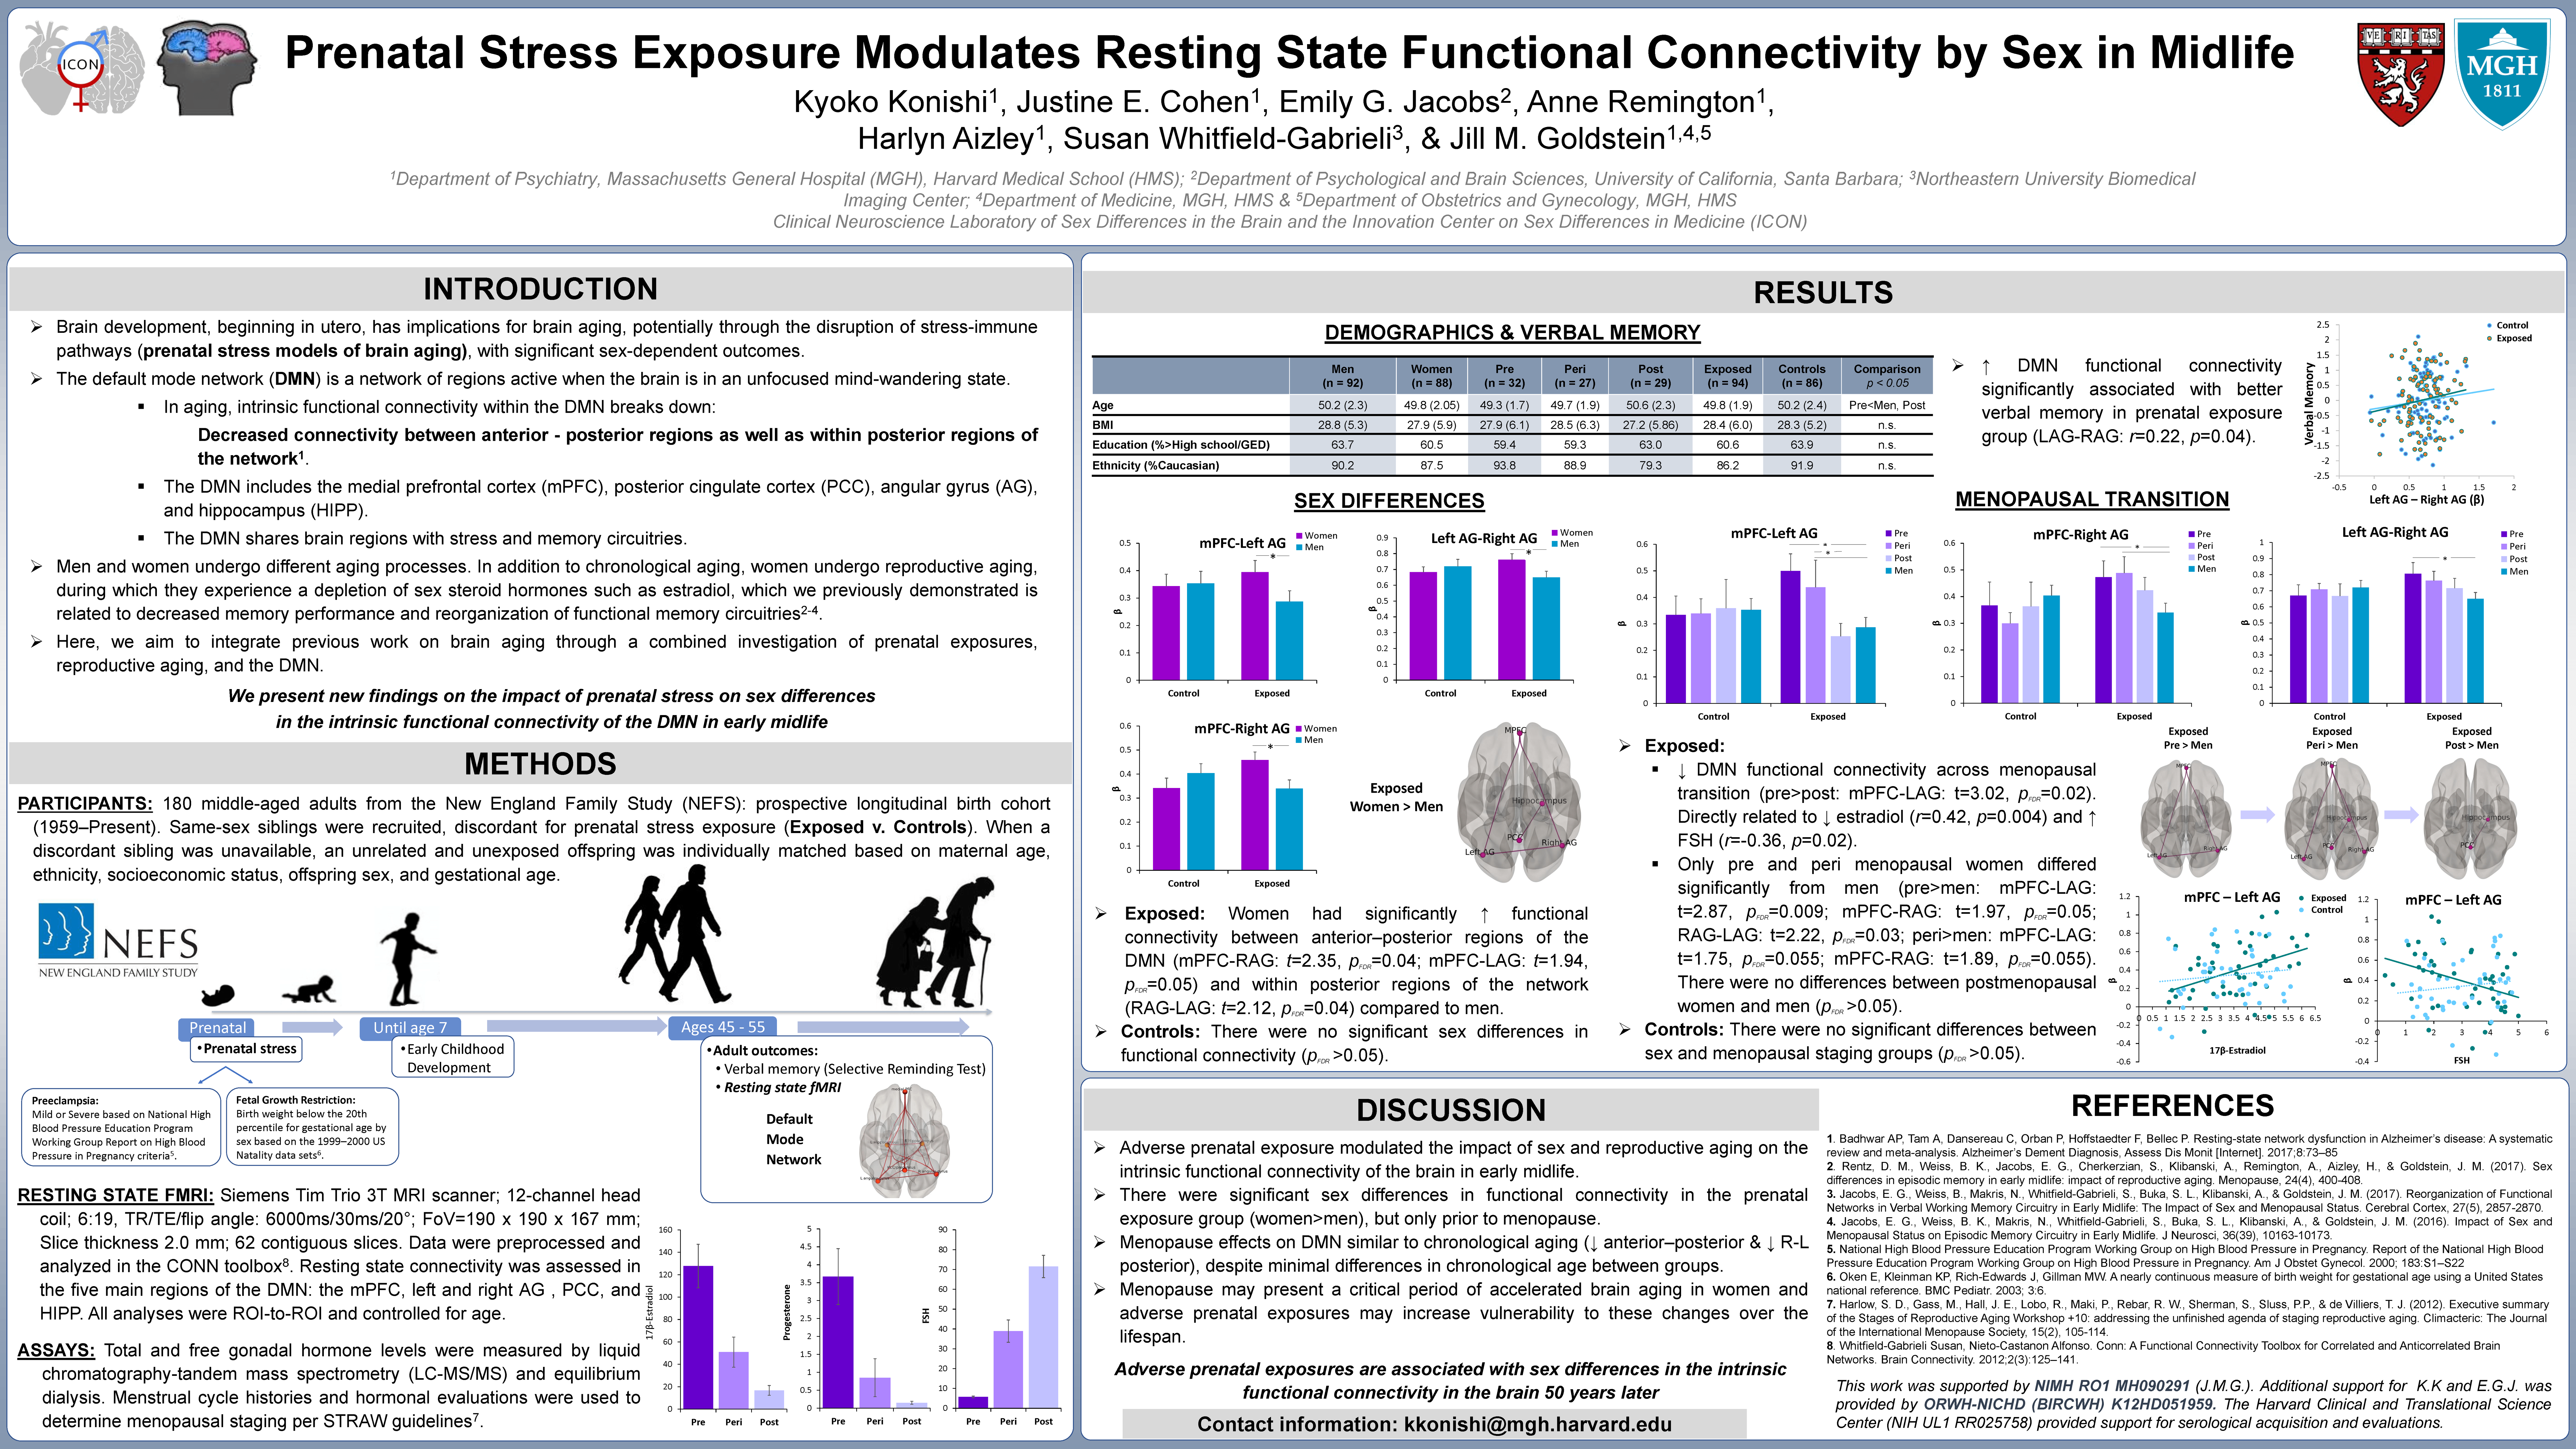 Prenatal Stress Exposure Modulates Resting State Functional Connectivity by Sex in Midlife